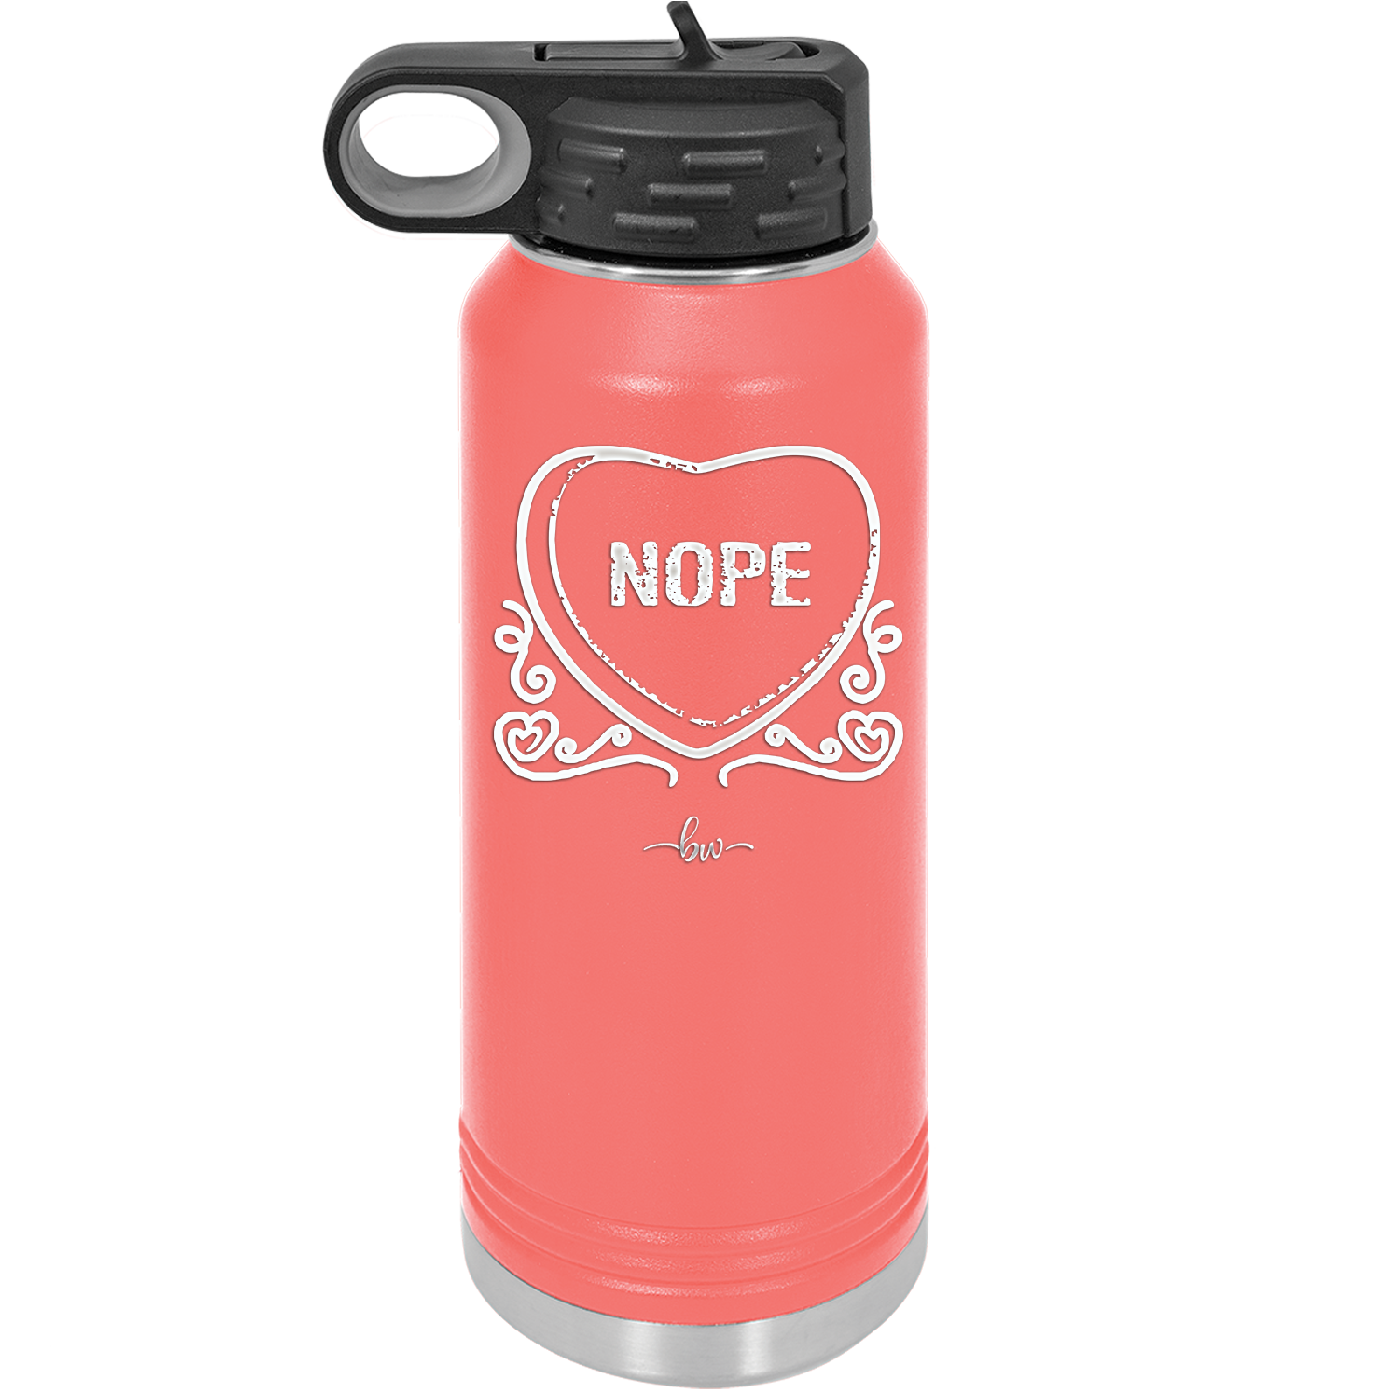 Candy Heart Nope - Laser Engraved Stainless Steel Drinkware - 1758 -